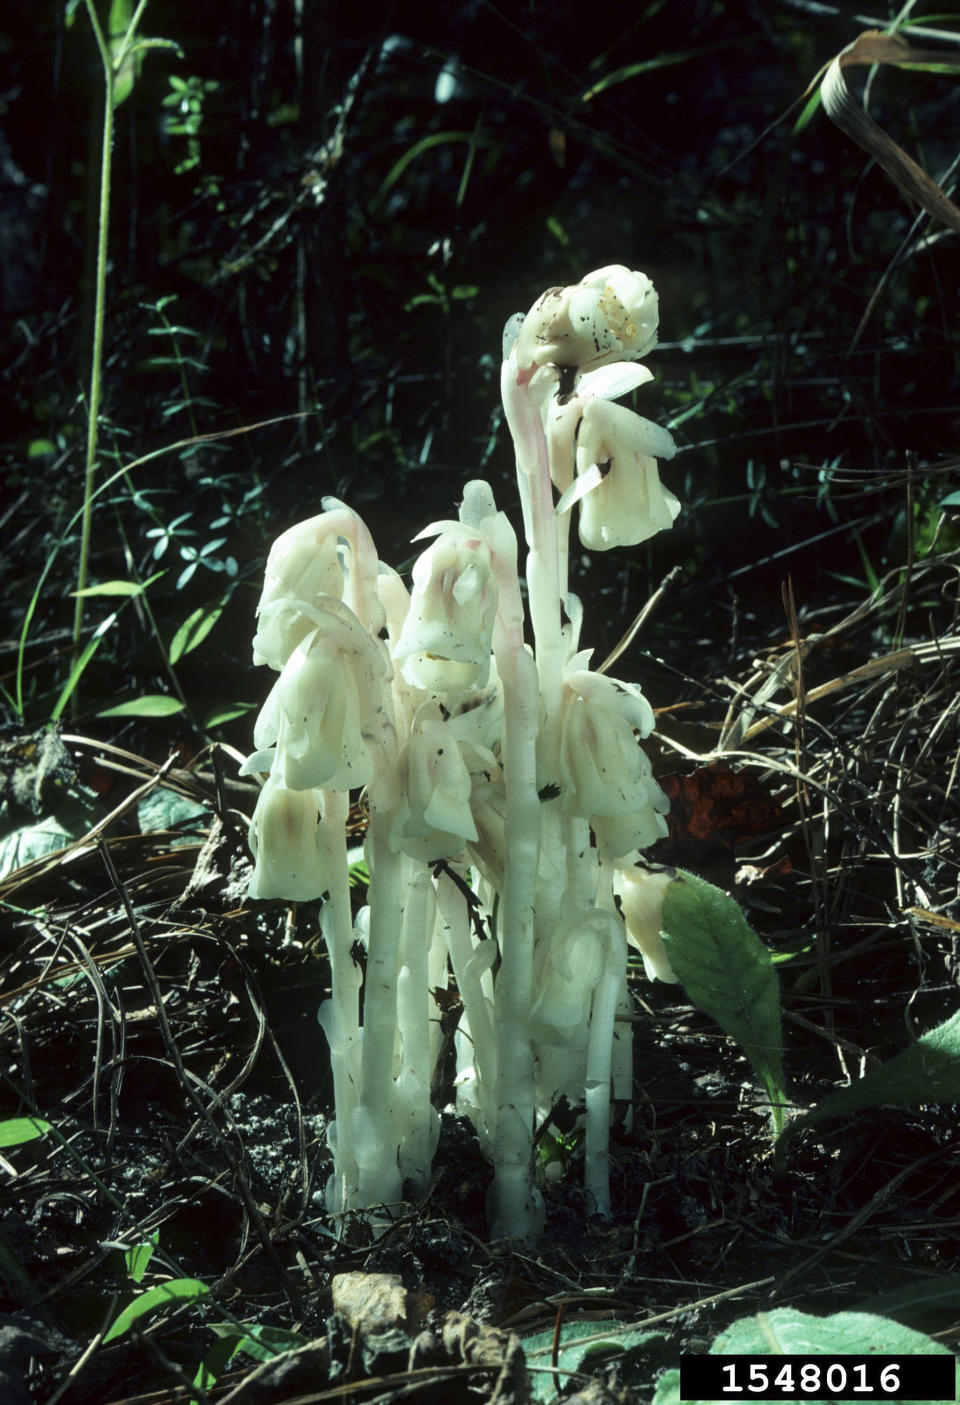 This Oct. 15, 1977 image provided by Bugwood.org shows a ghost plant growing in Statesboro, Ga. The white plant, also known as Indian pipe, doesn't produce chlorophyl, the pigment that gives other plants their green color. (Sturgis McKeever/Georgia Southern University/Bugwood.org via AP)